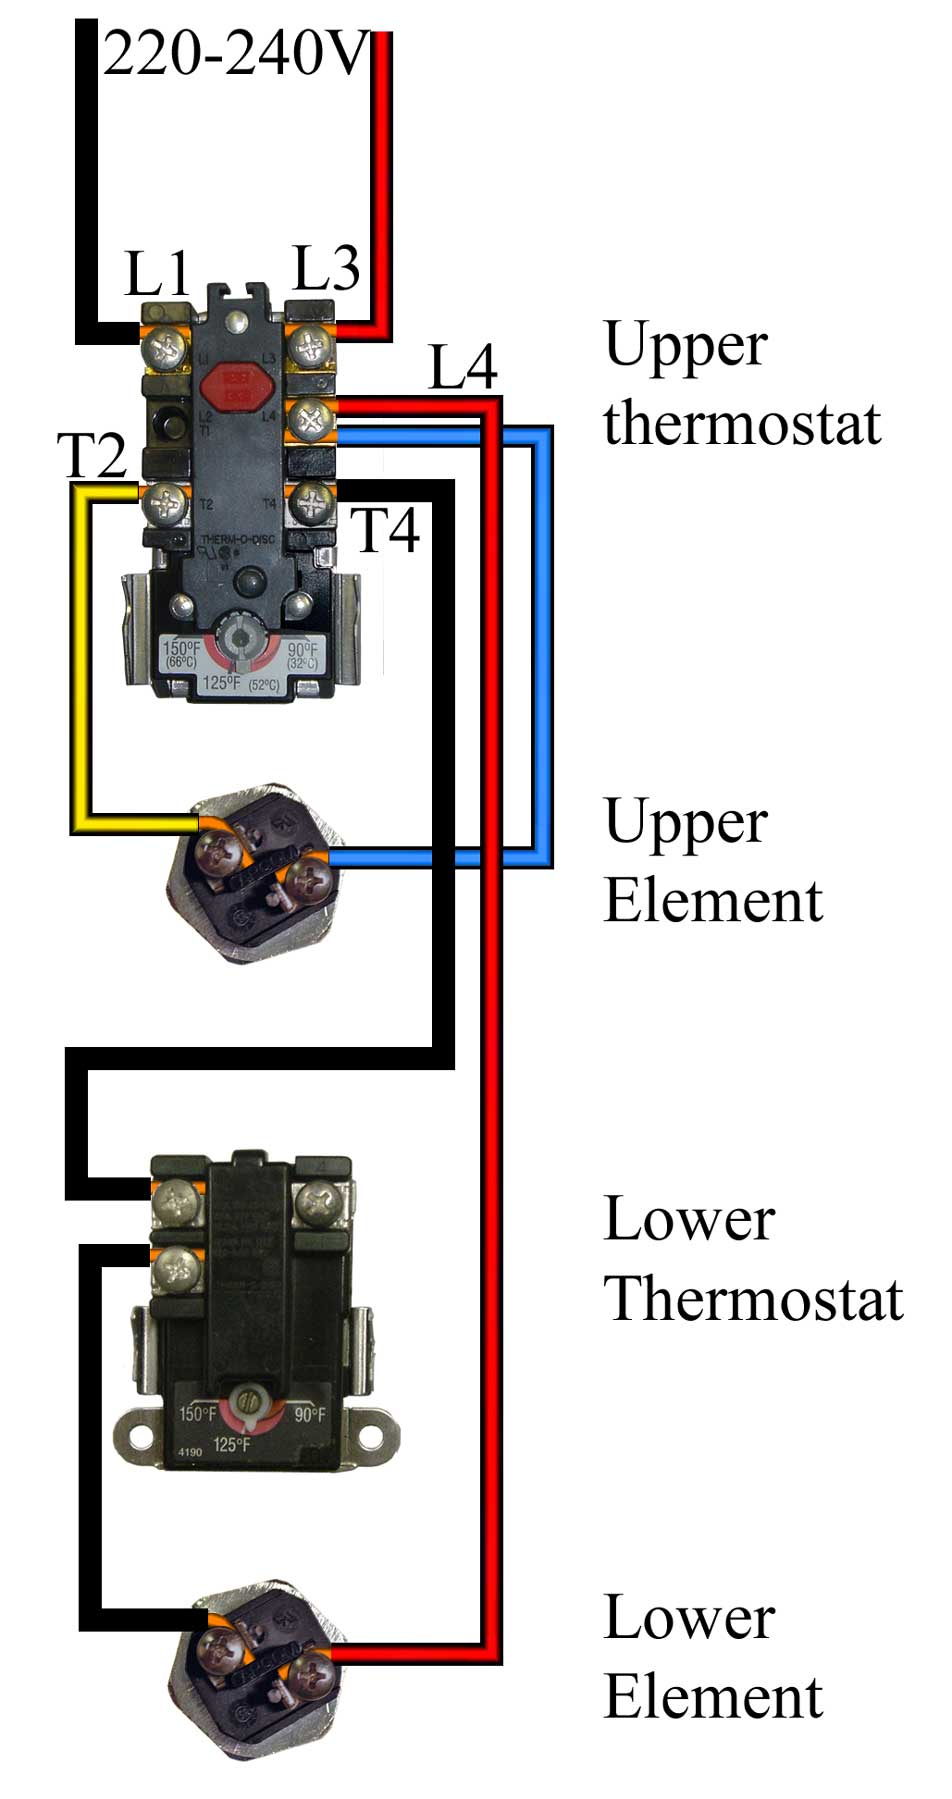 Wiring For Electric Hot Water Tank - Data Wiring Diagram Schematic - Electric Hot Water Heater Wiring Diagram